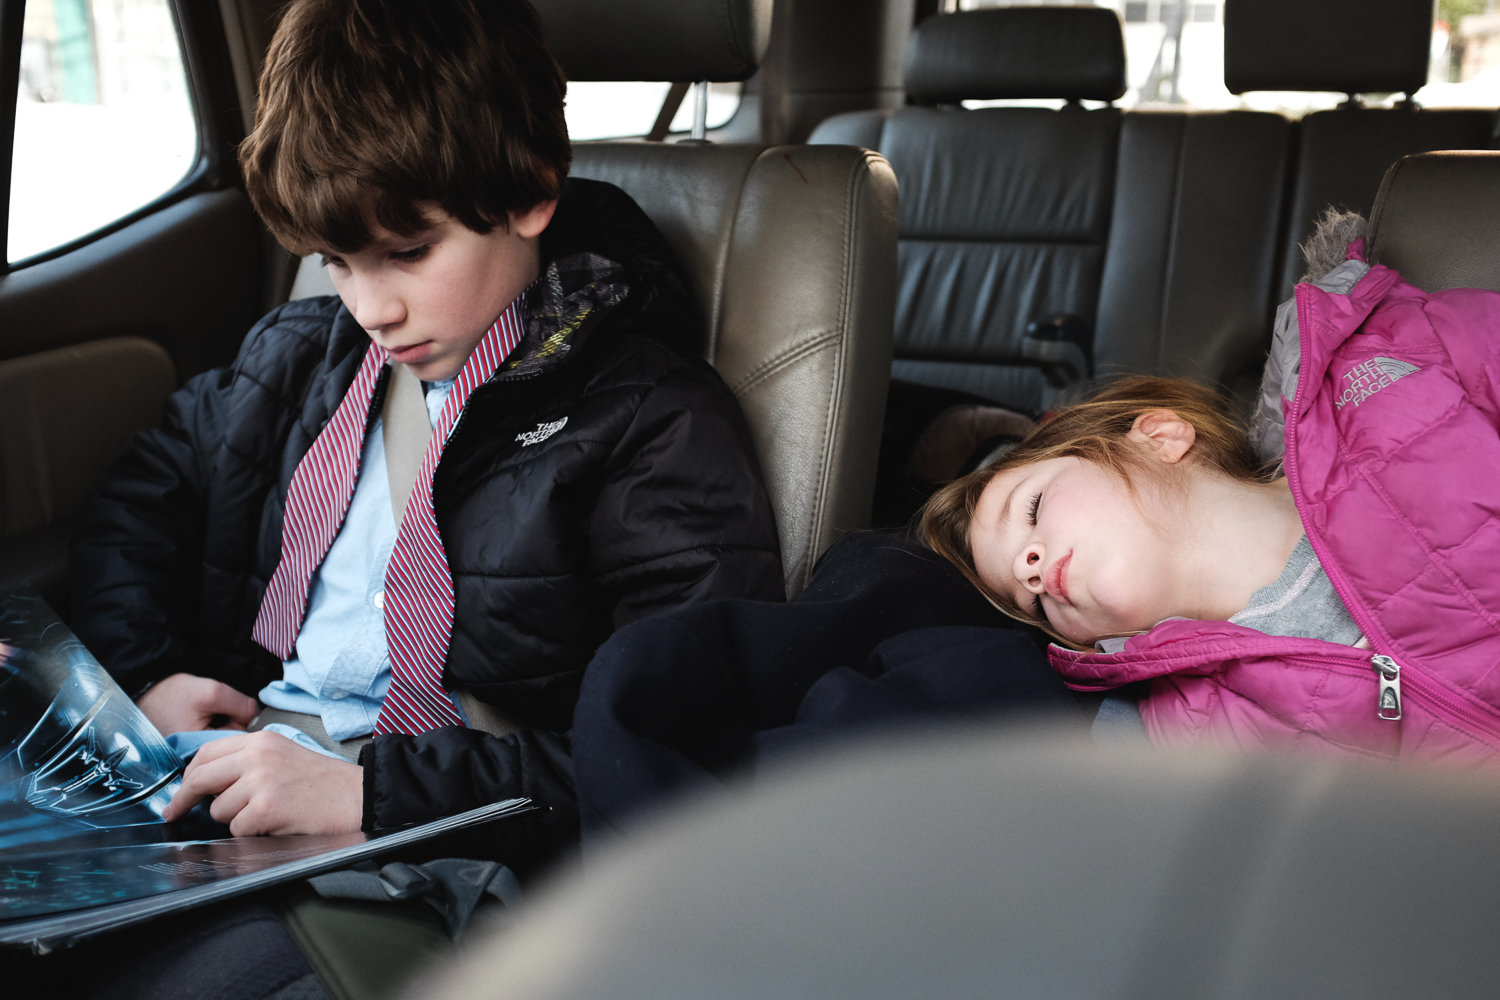 Boy reading in backseat of car with little sister sleeping beside him.